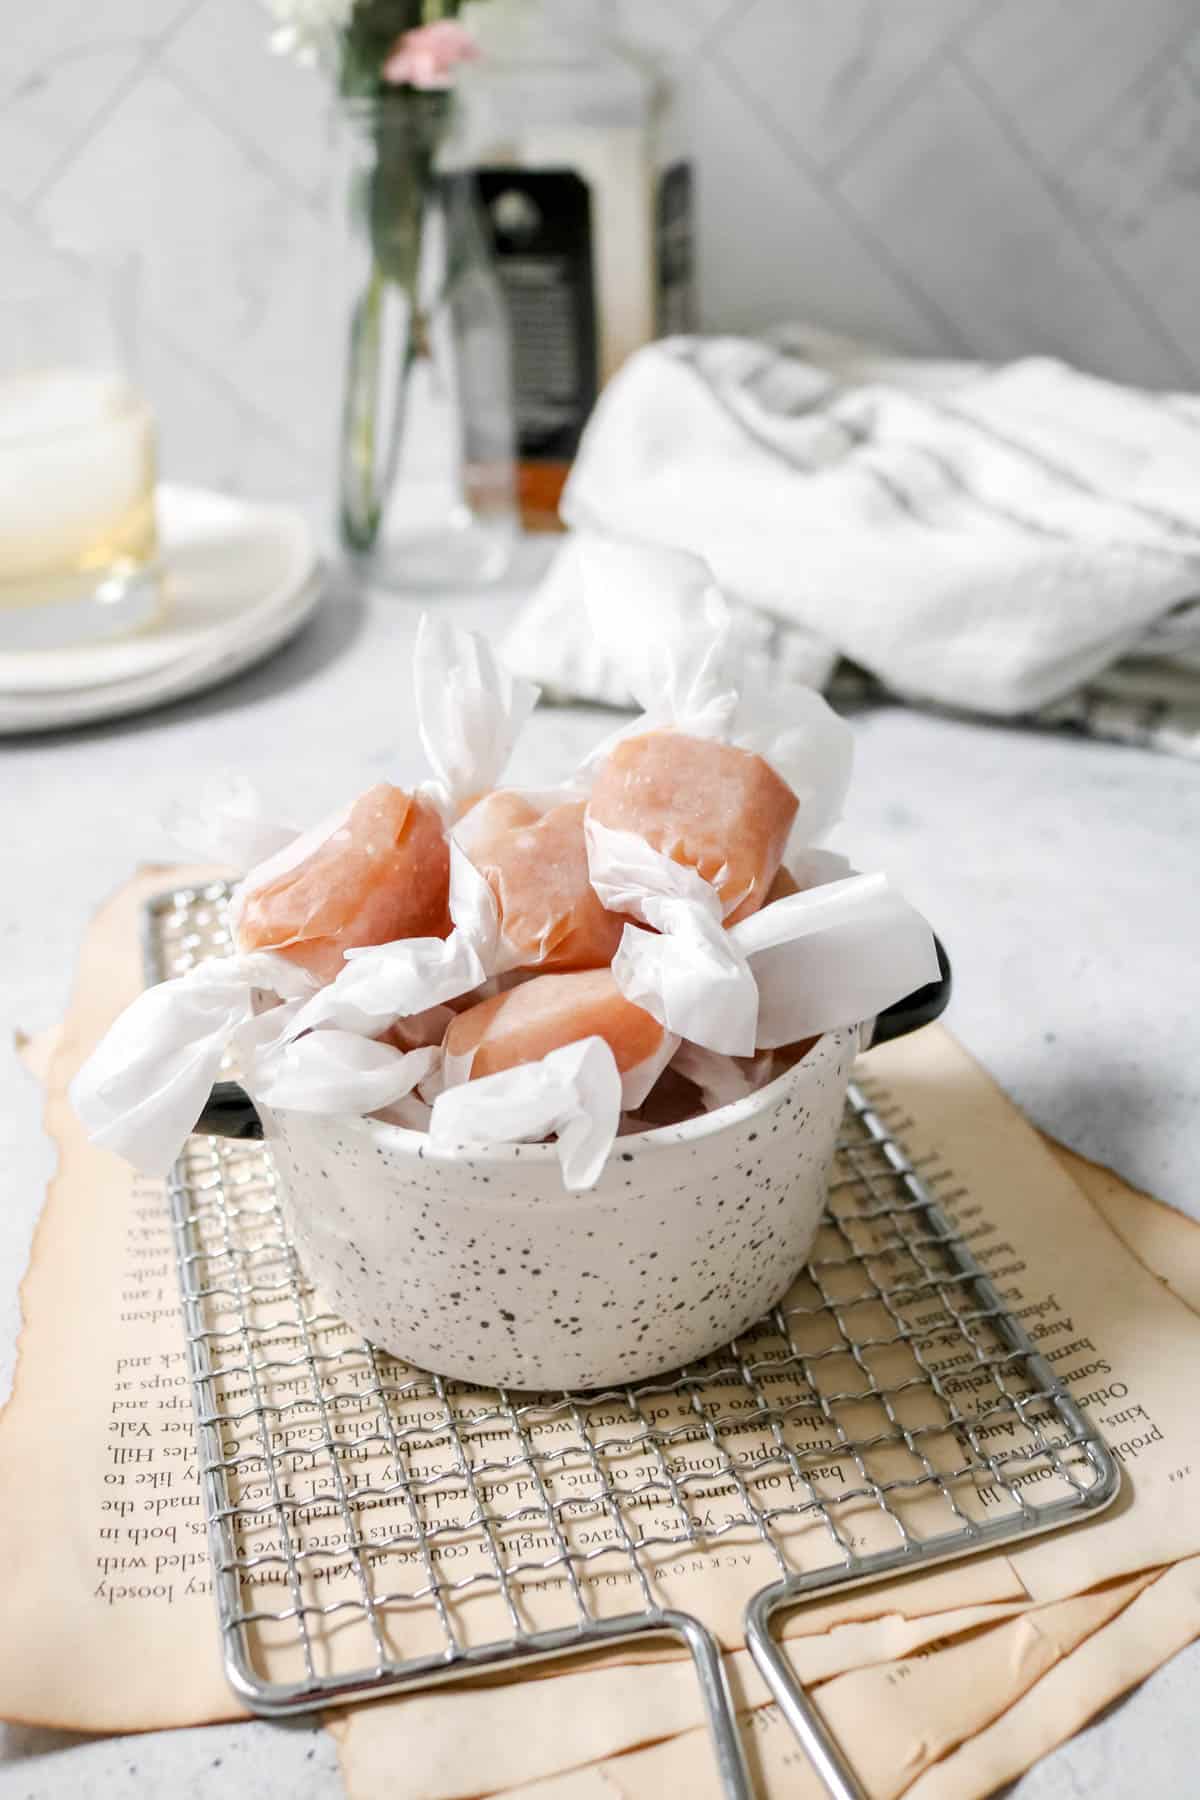 Whiskey salted caramels in a dish and wrapped in wax paper.